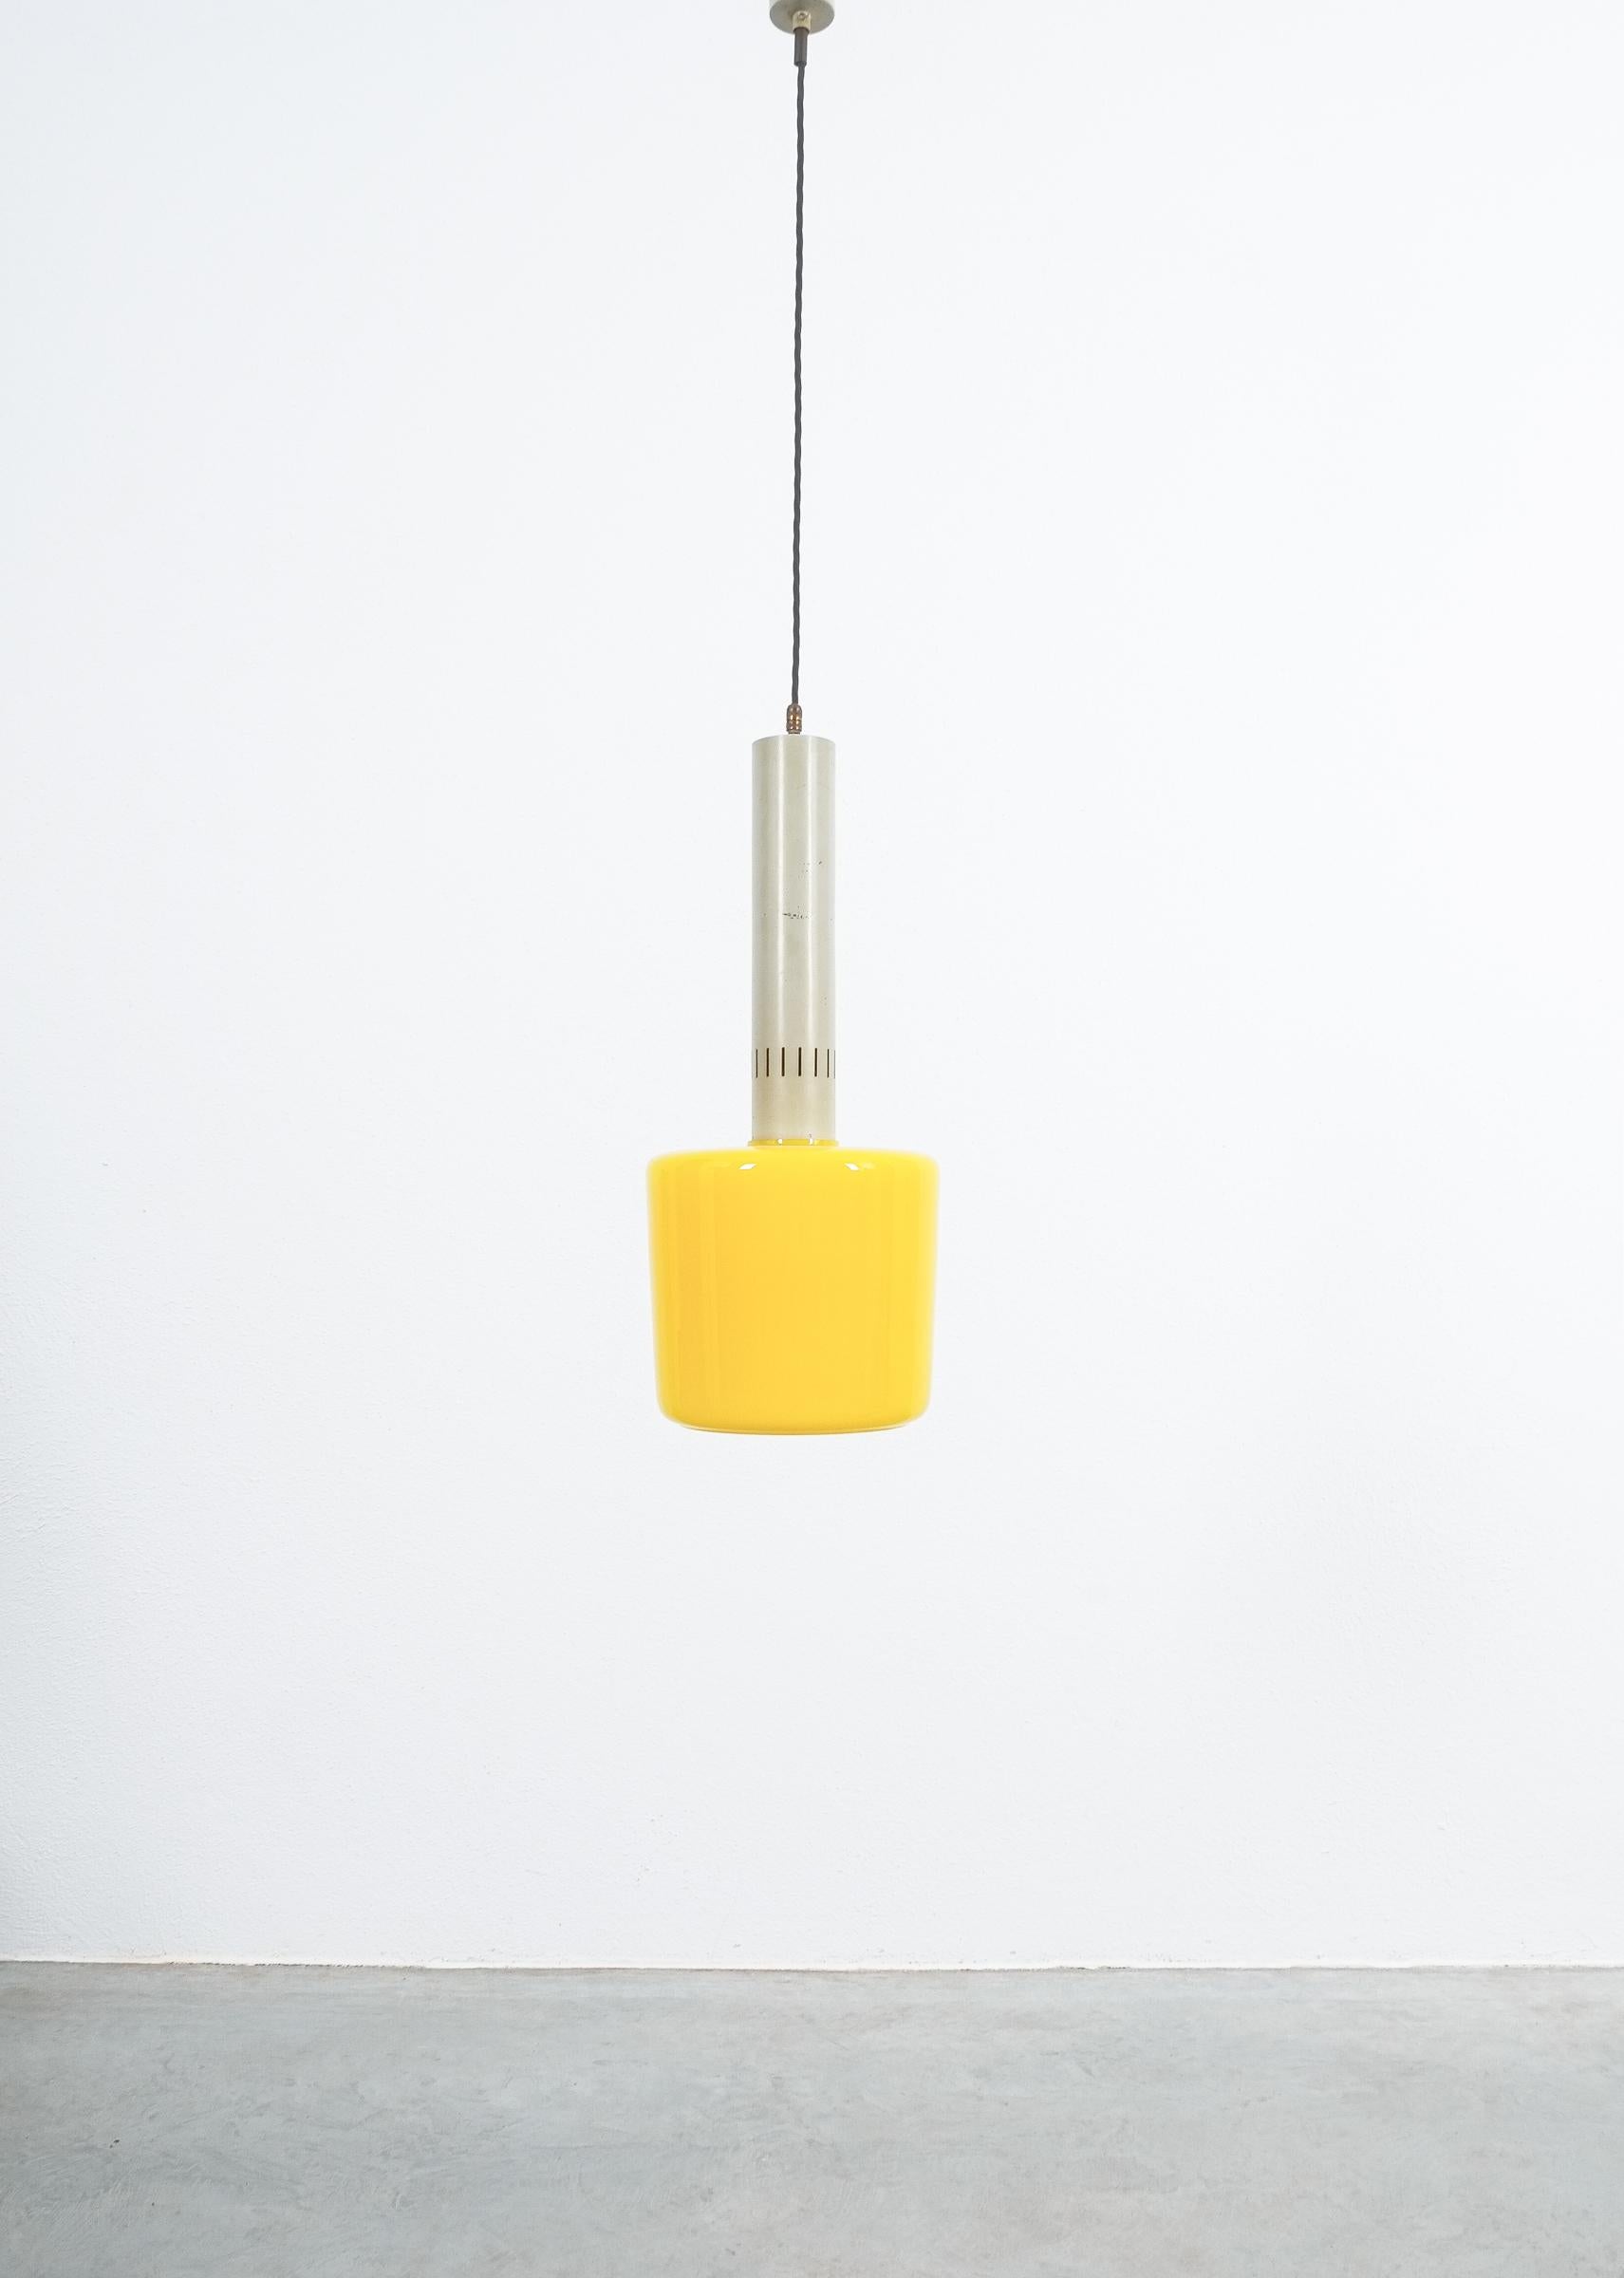 Stilnovo yellow glass pendant lamp glass, circa 1950

Beautiful Italian pendant light with a yellow glass shade and grey lacquered aluminum hardware. It's in good original condition with no chips to the glass shade, some wear to the original